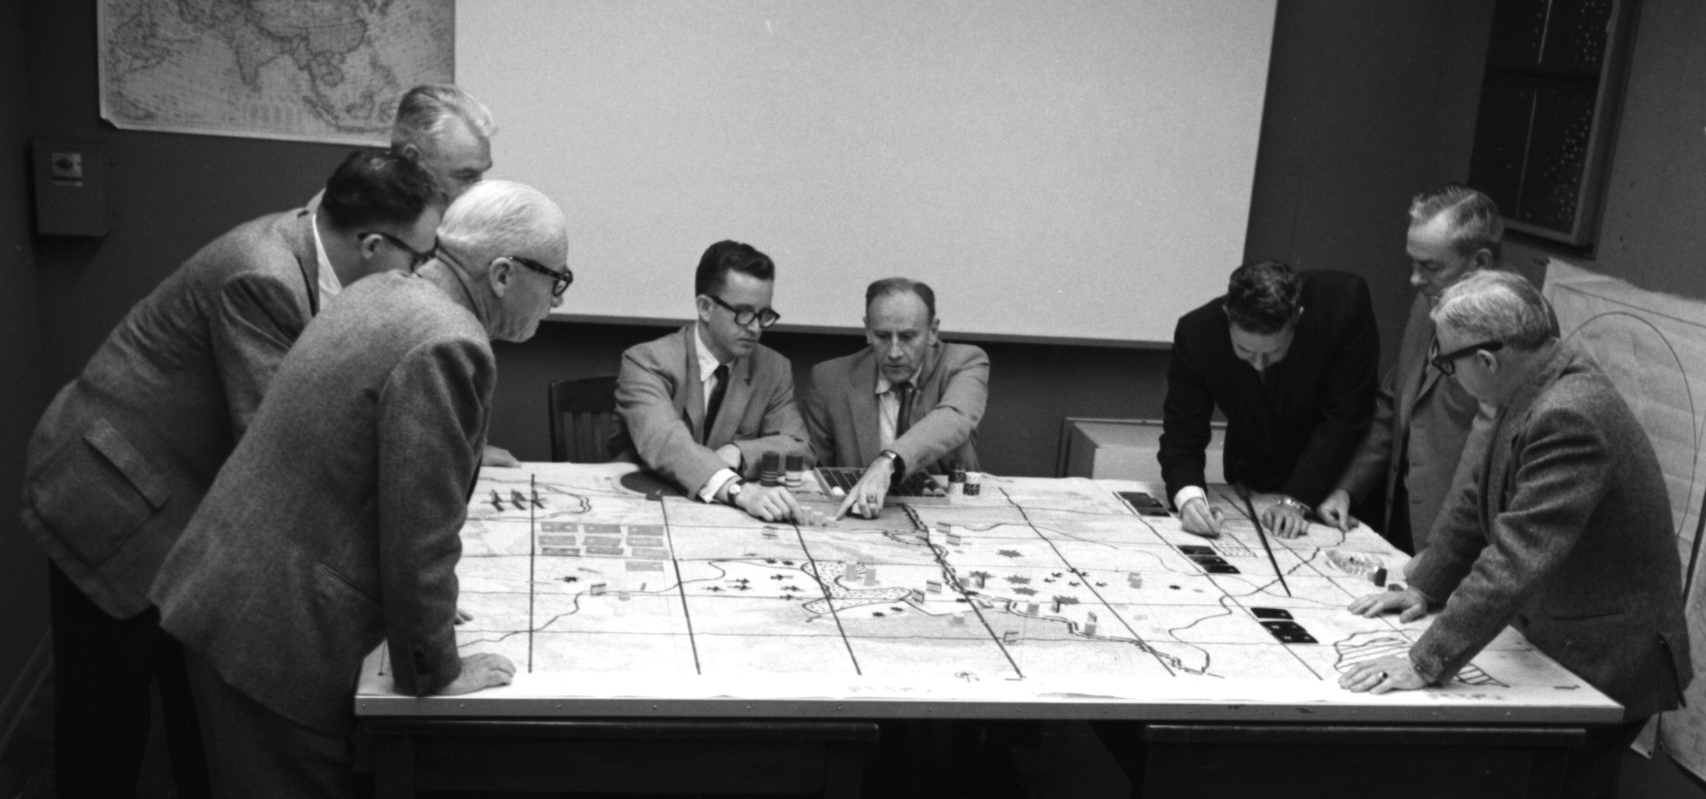 Engineering Operations game with Milton Weiner, Olaf Helmer, and others, 1966. RAND Archives.